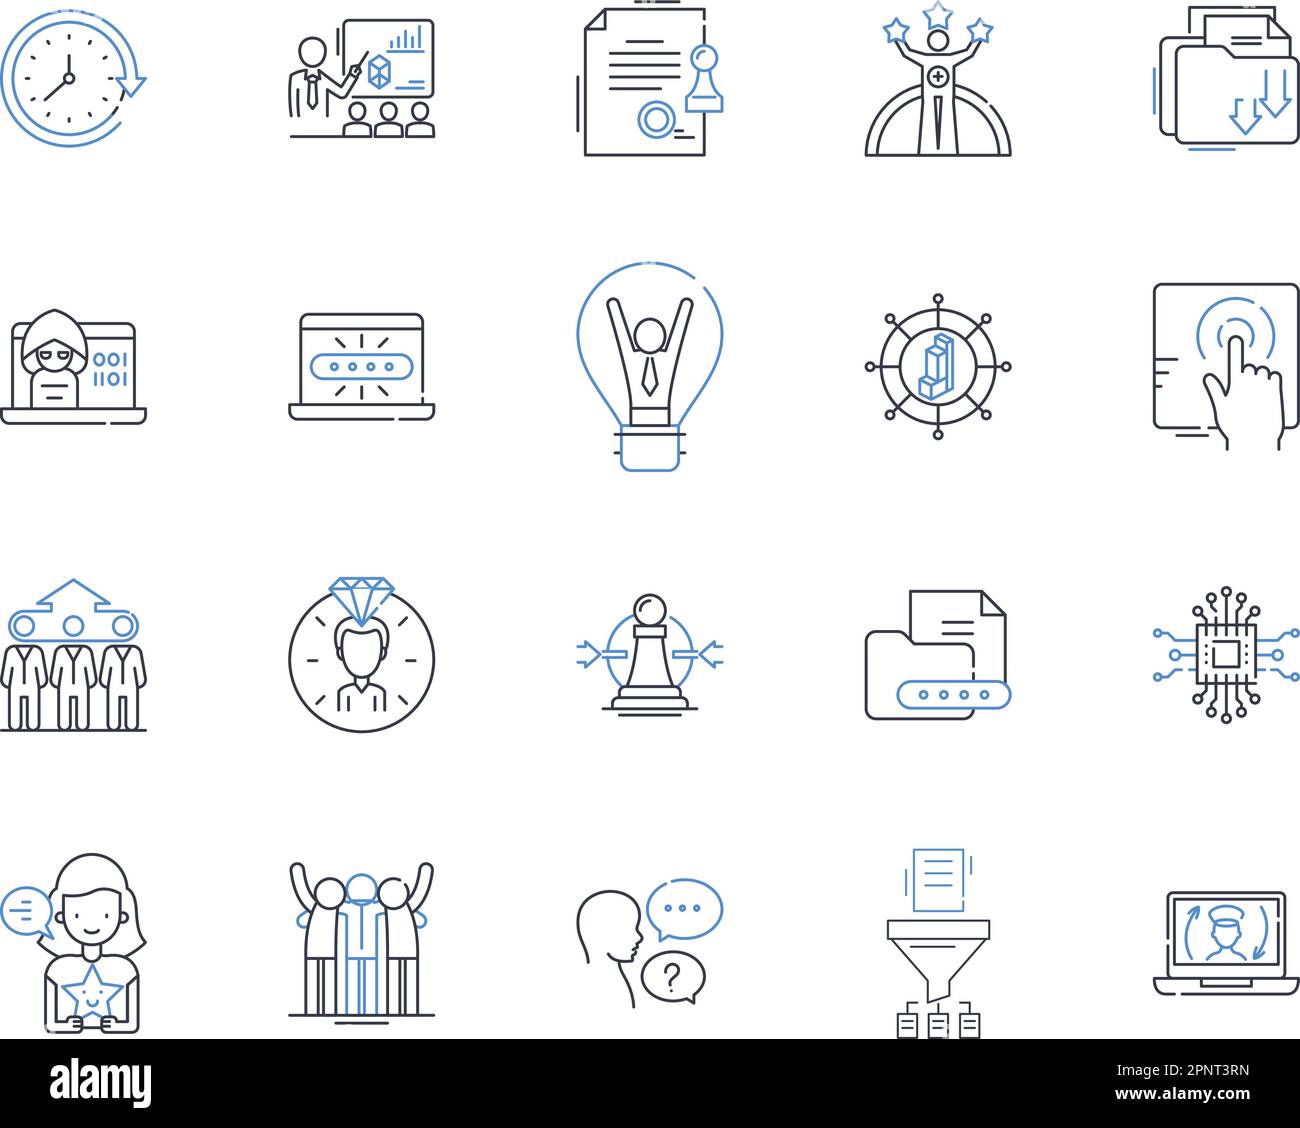 Strategic engagement line icons collection. Alignment, Collaboration, Coordination, Communication, Empowerment, Execution, Focus vector and linear Stock Vector